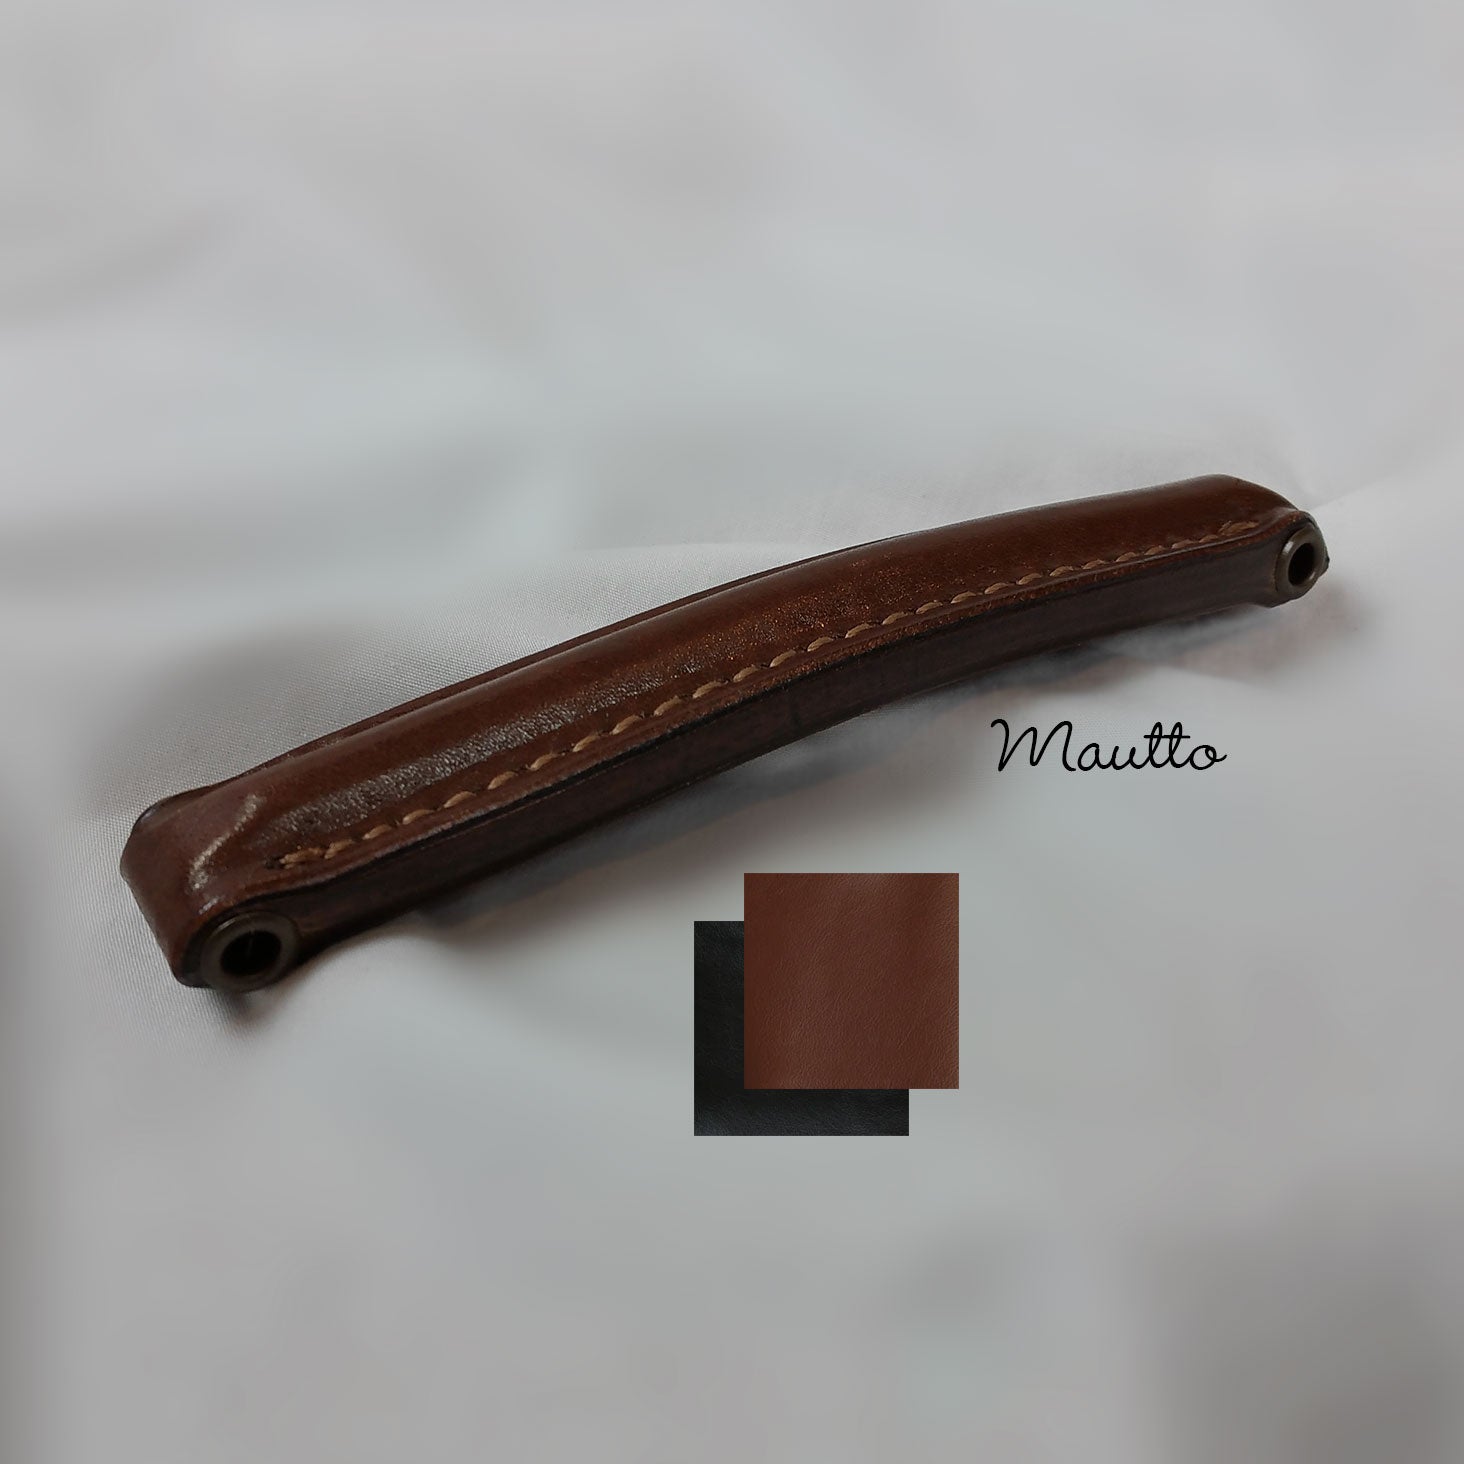 Leather Briefcase Handle - Reinforced & Structured - 6 inch Length, 1 inch Wide, 3/4 inch Thickness - for Repair, Replacement, DIY